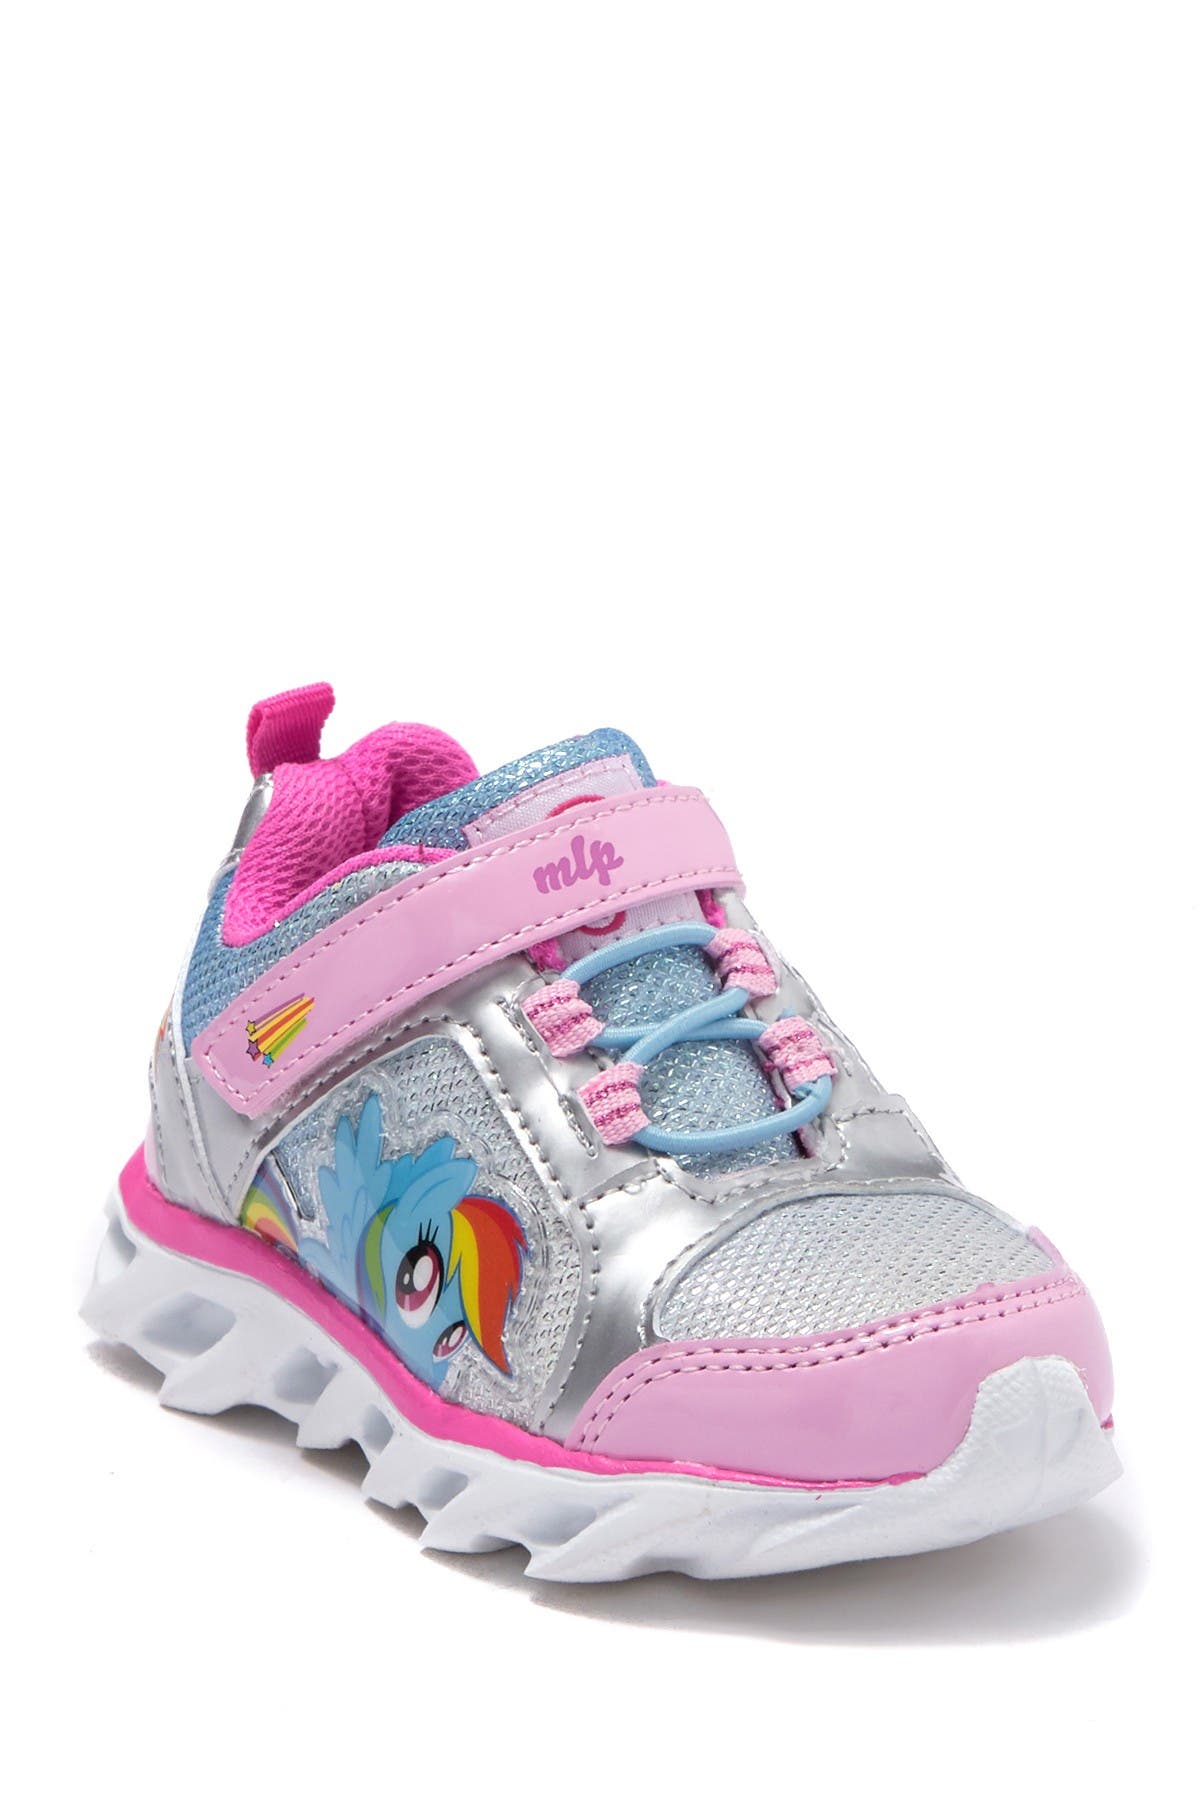 rainbow dash shoes toddler